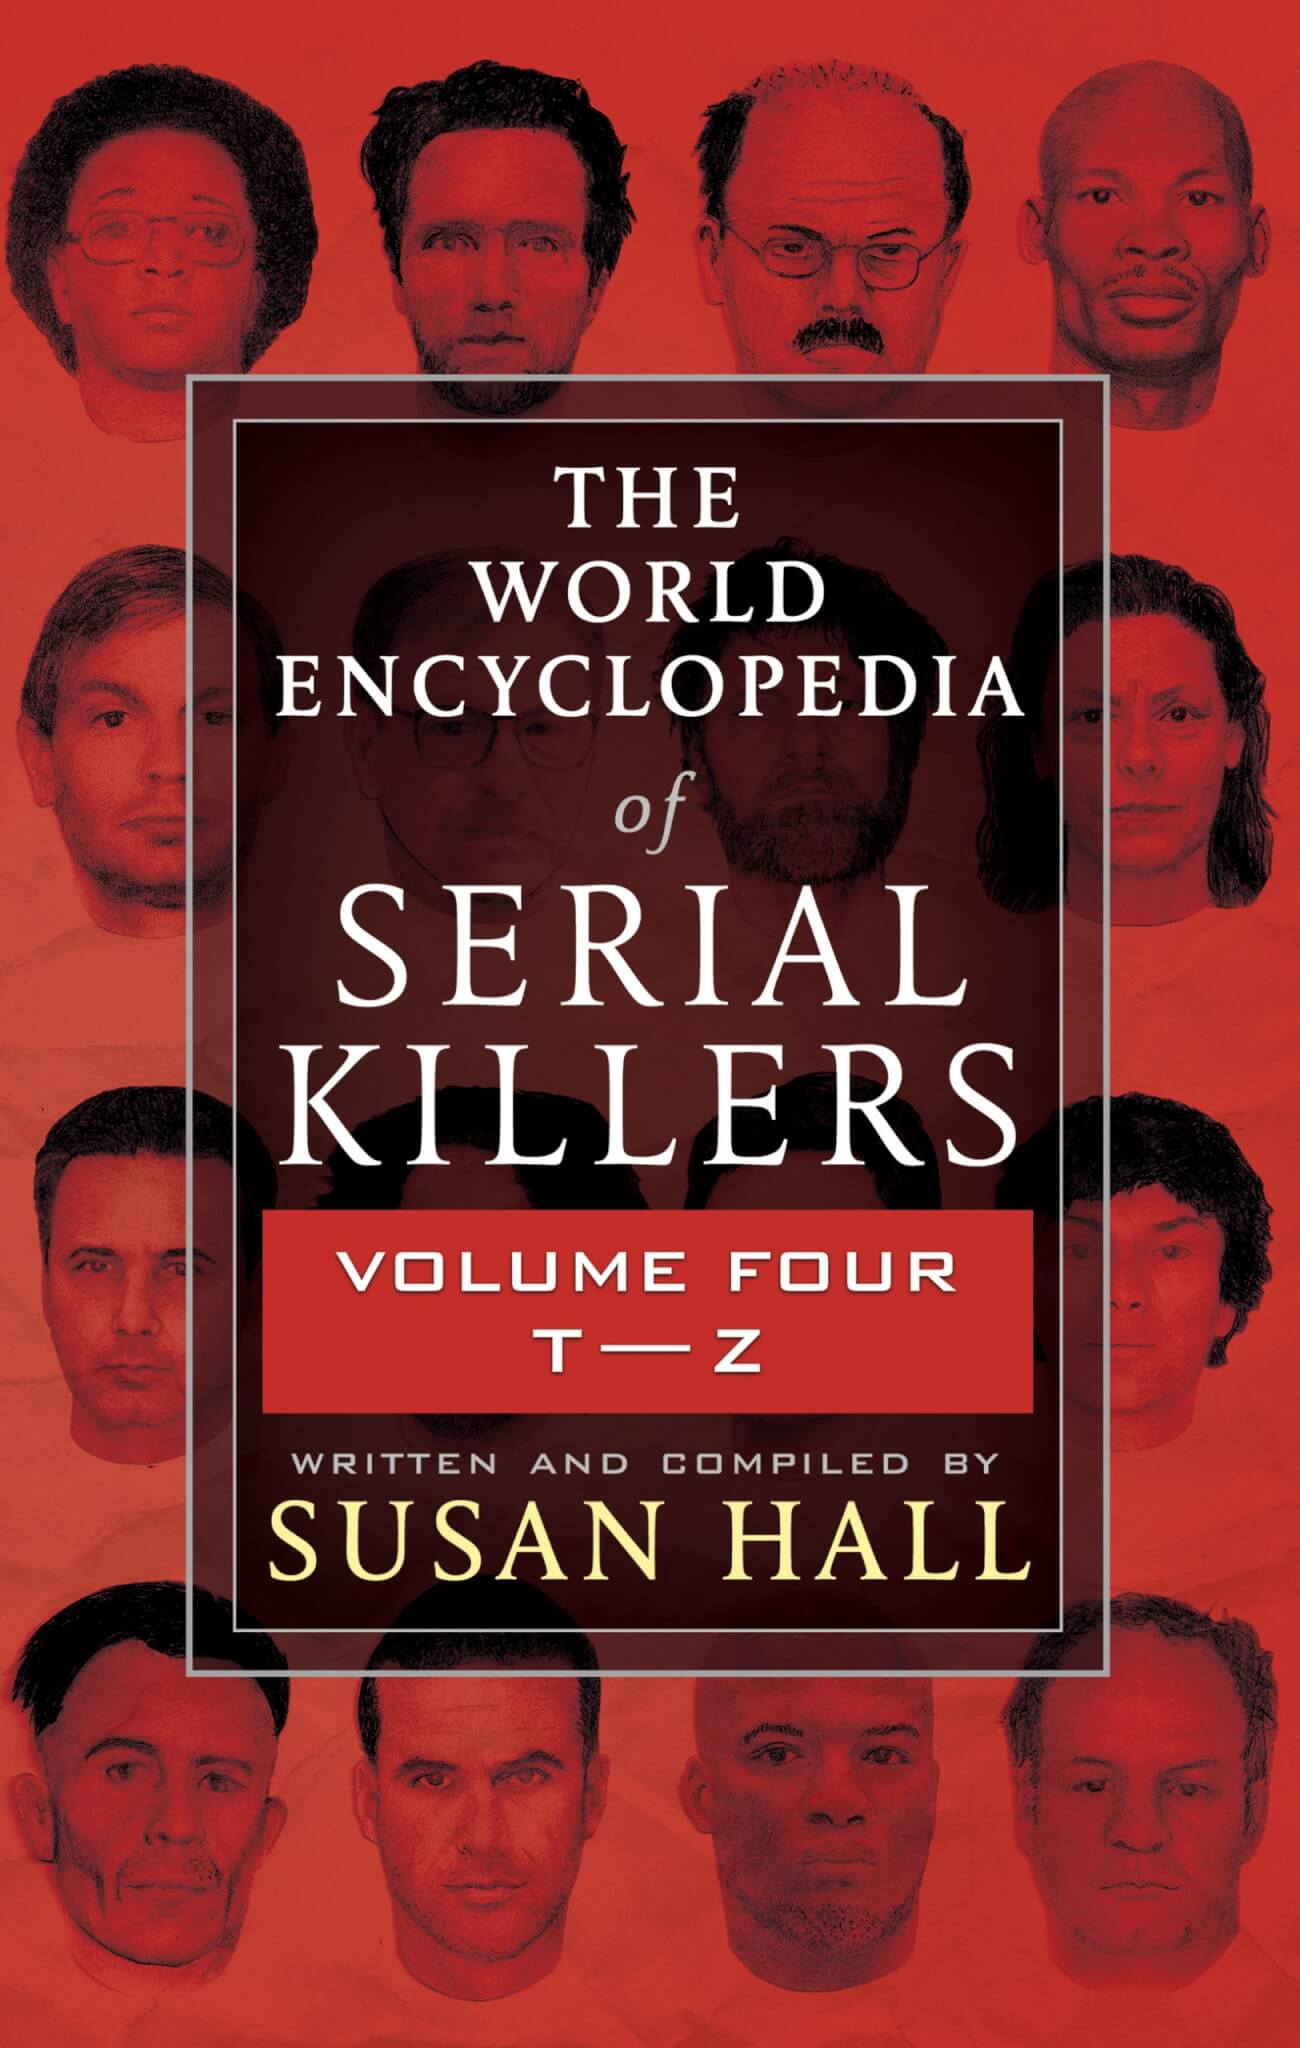 The World Encyclopedia Of Serial Killers Volume Four:  Paperbacks Available